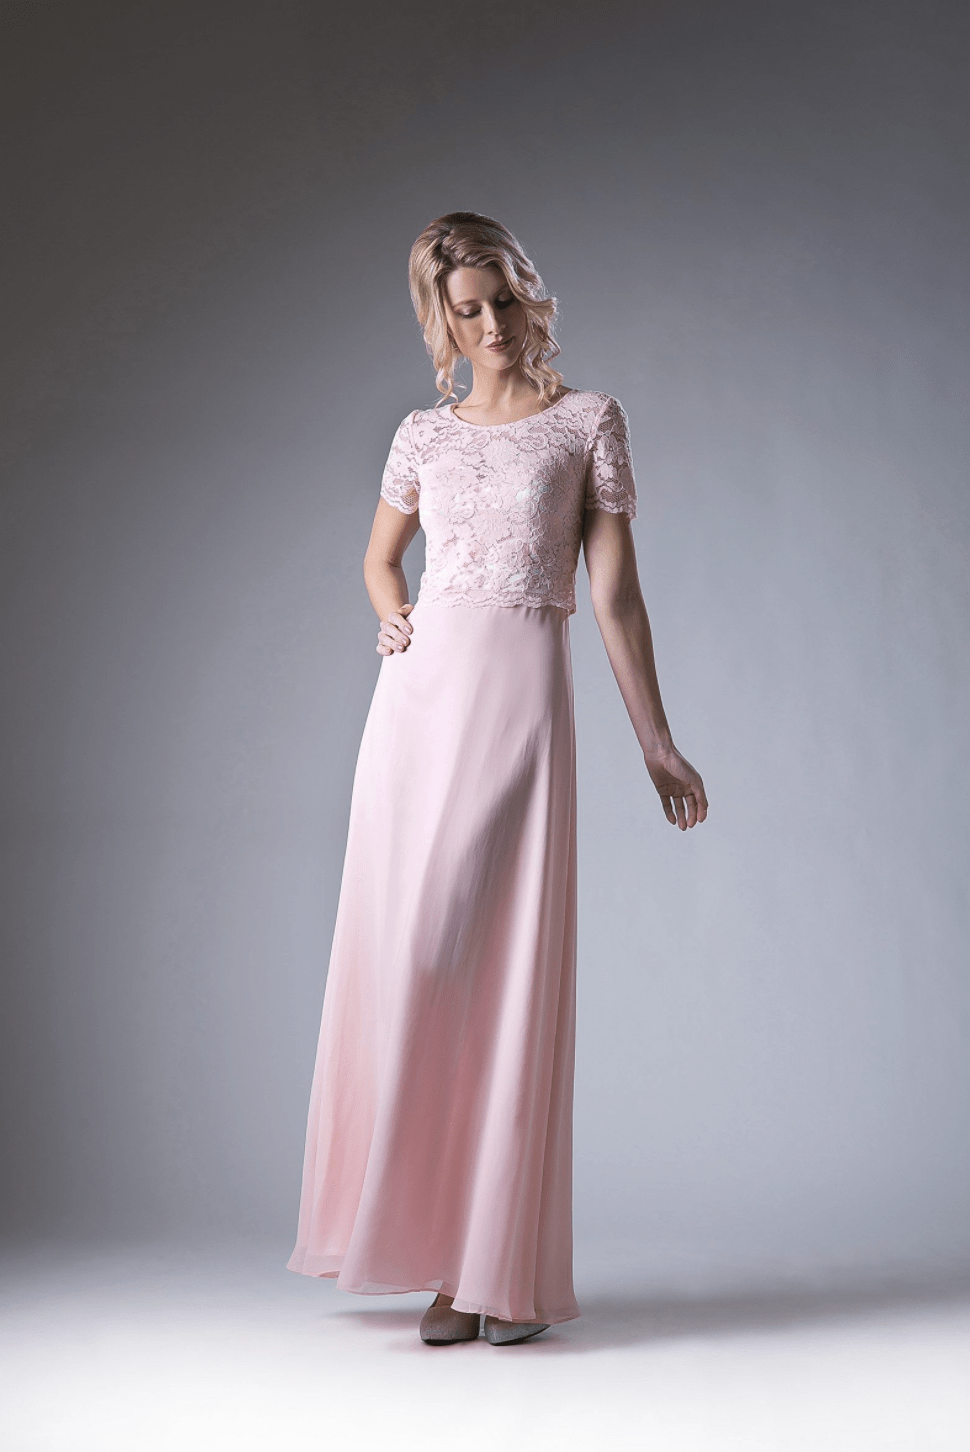 Chiffon Shoulder Sleeve Dress by Ladivine - NORMA REED